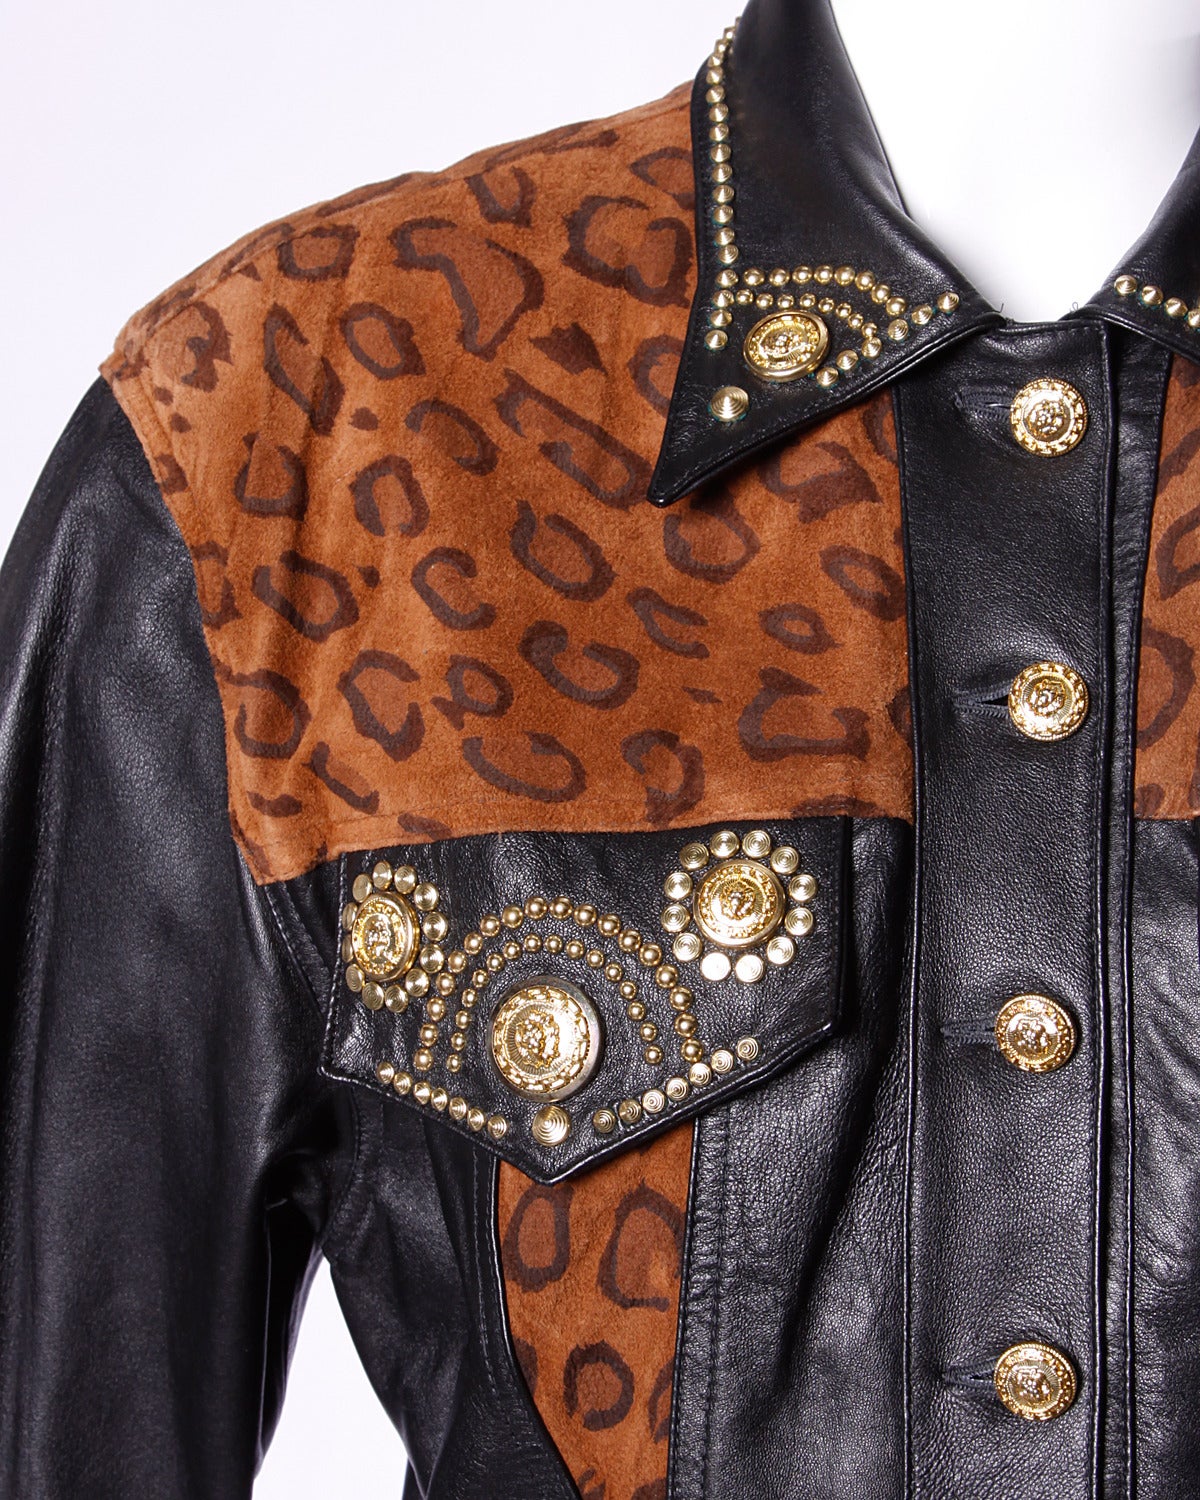 Versace-inspired buttery soft leather jacket with brown leopard print detailing, gold studding and lion's head buttons. By Lillie Rubin.

Details:

Fully Lined
Shoulder Pads Are Sewn Into Lining
Estimated Size: Small-Medium
Color: Brown/